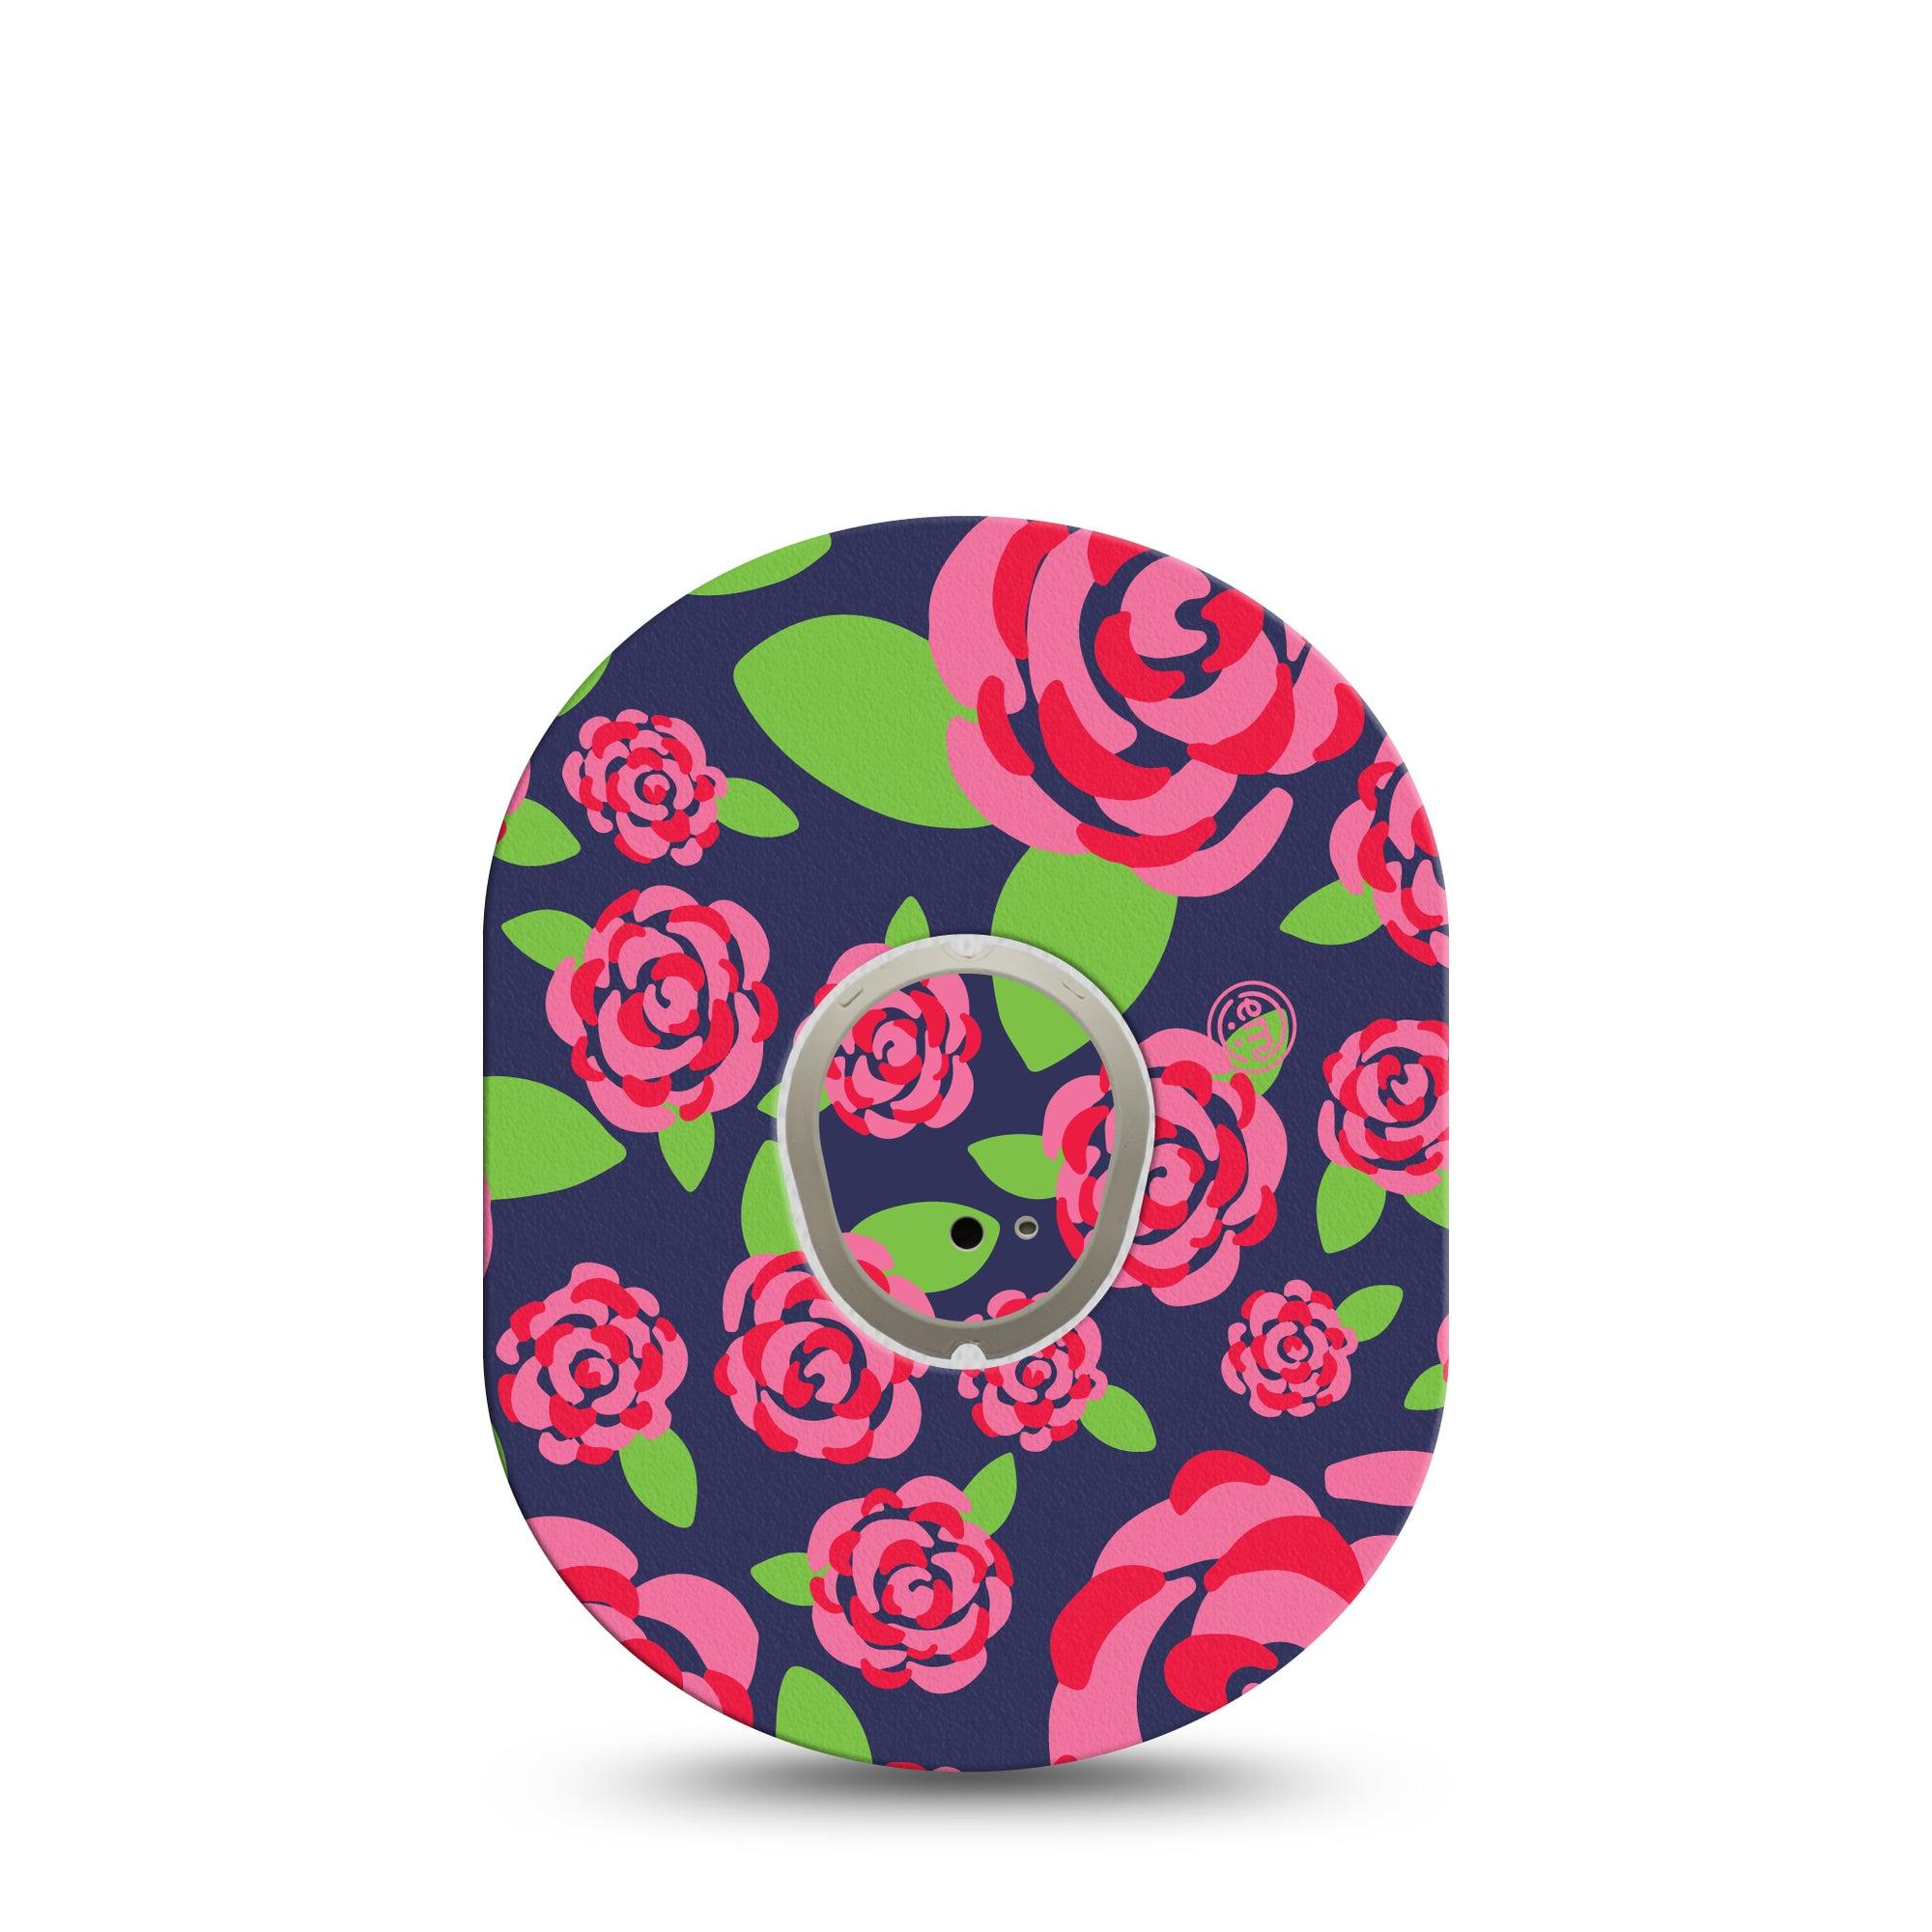 ExpressionMed Pretty Pink Roses Dexcom G7 Transmitter Sticker, Good Looking Florals Inspired, Dexcom Vinyl Center Sticker, With Matching Dexcom G7 Tape, CGM Overlay Patch Design